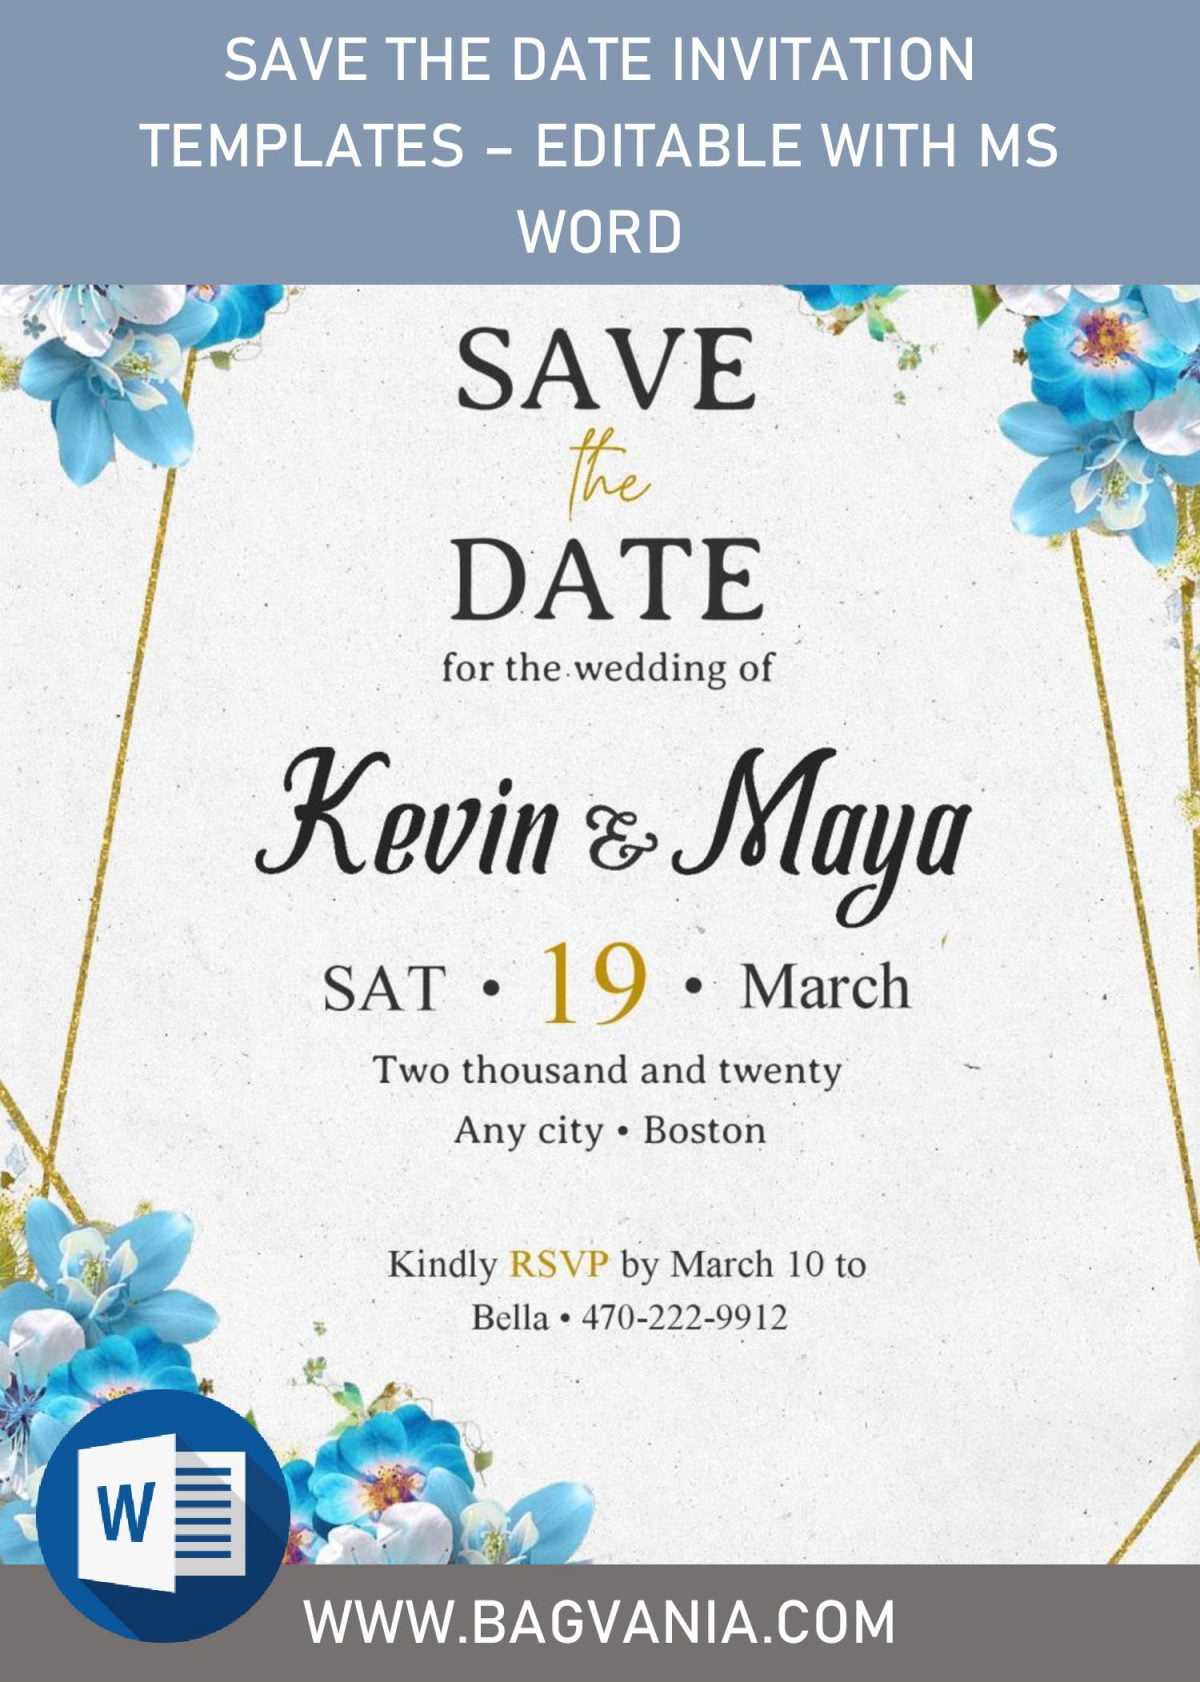 Save The Date Invitation Templates - Editable With MS Word